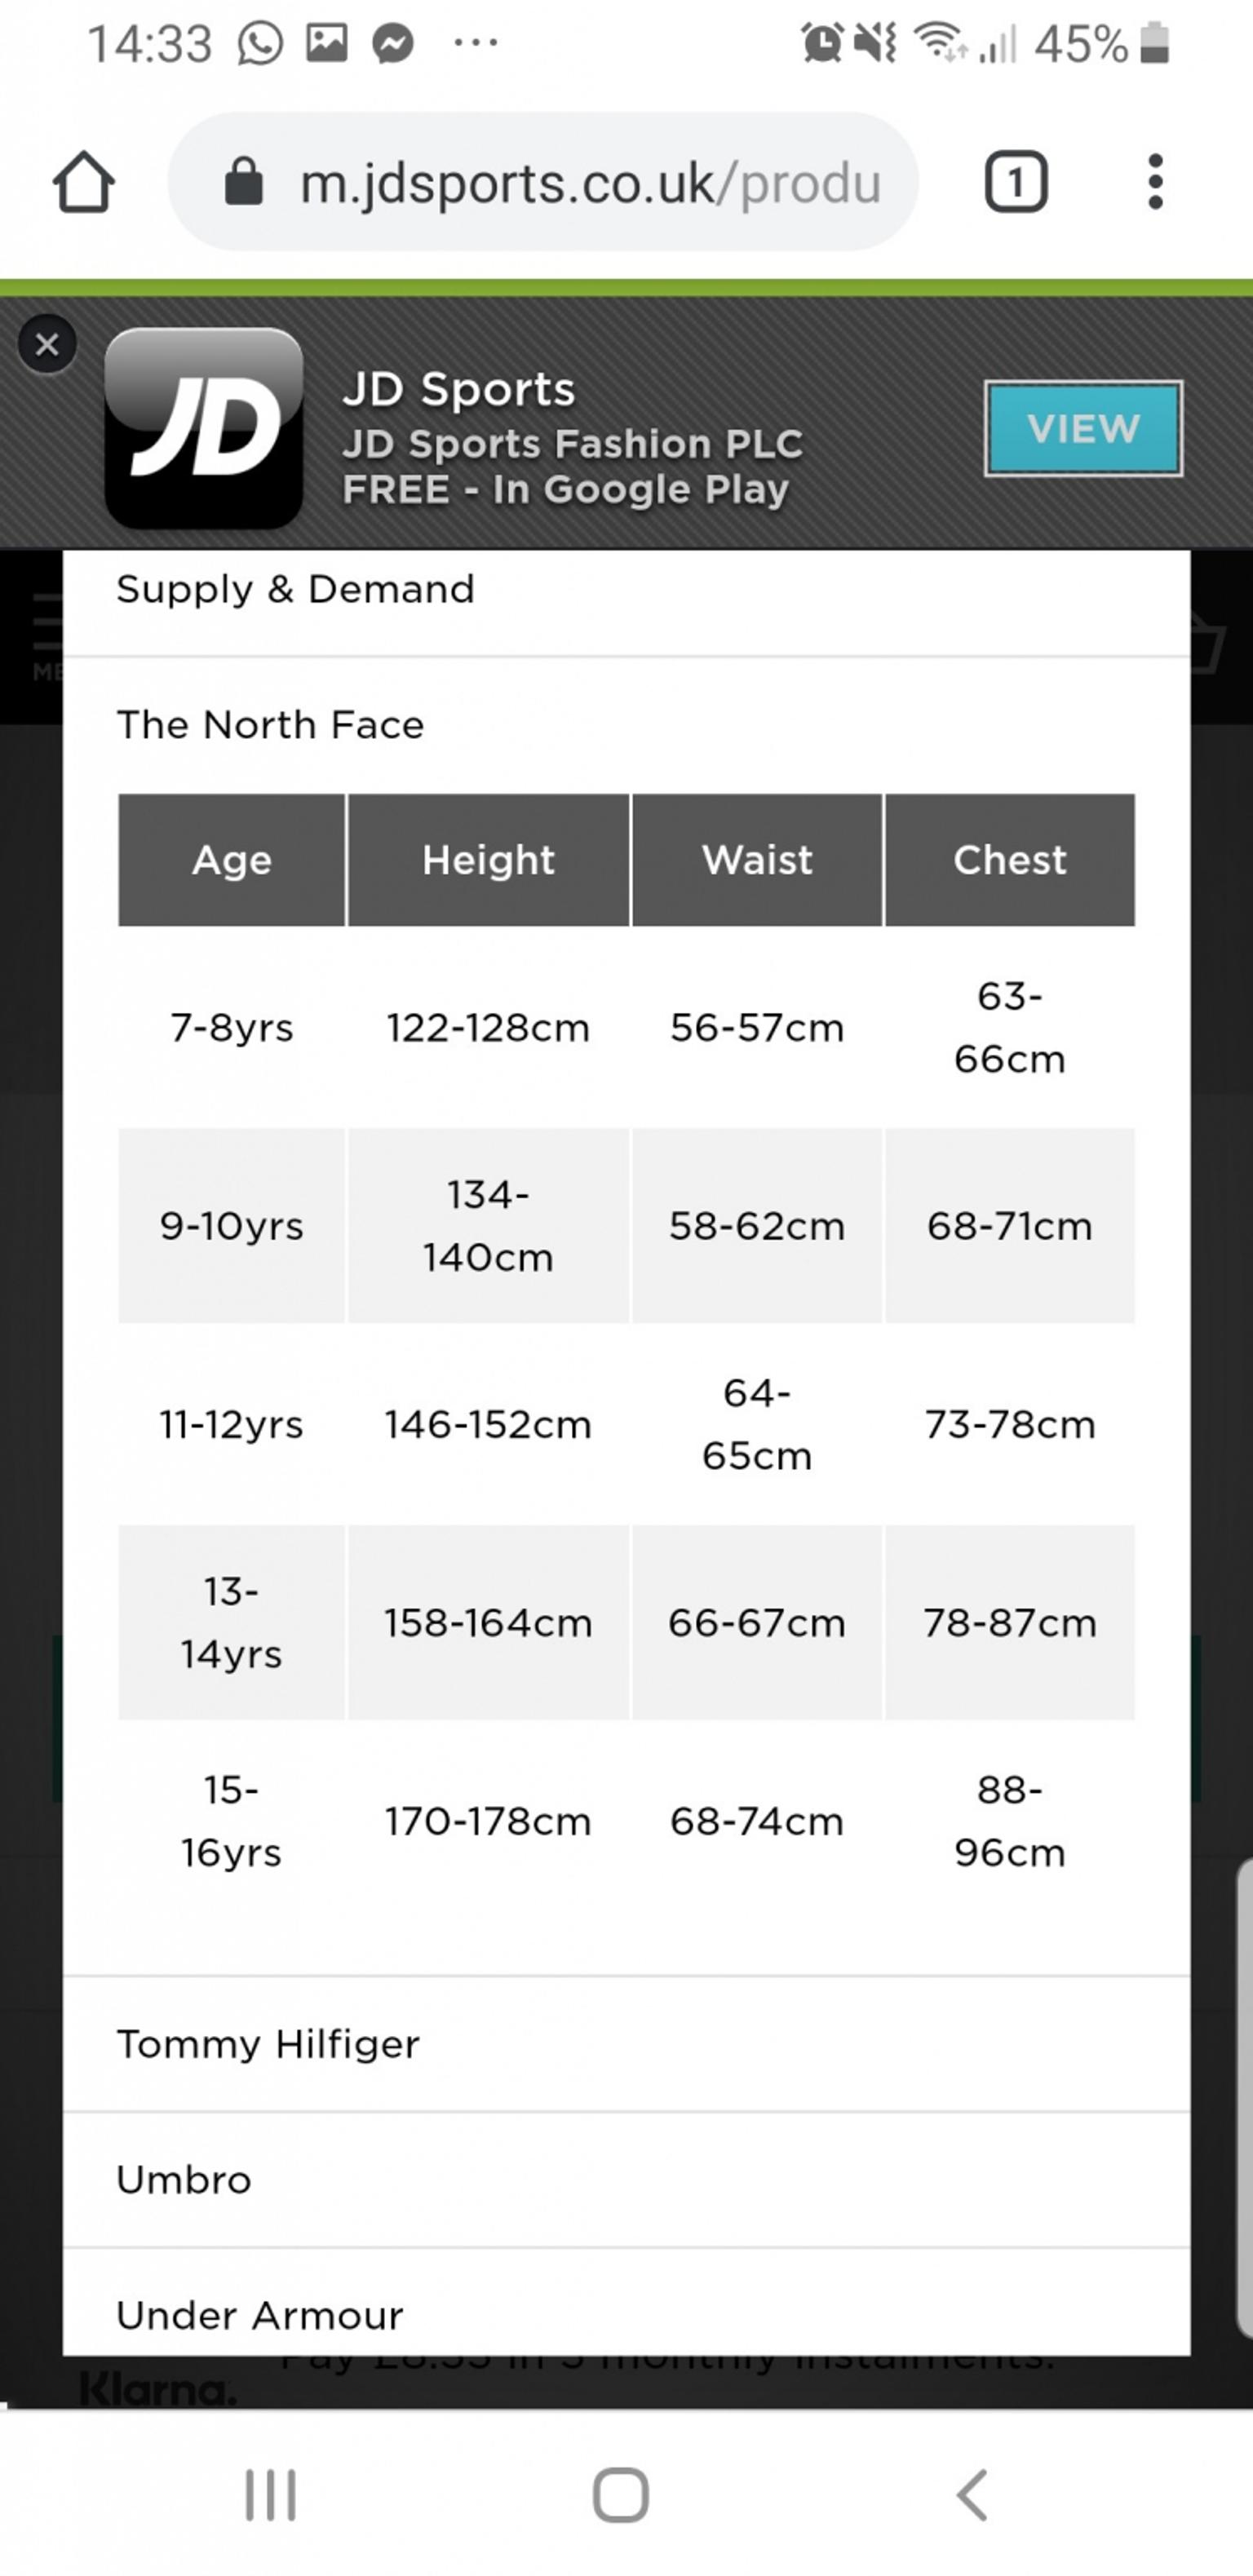 north face large size chart